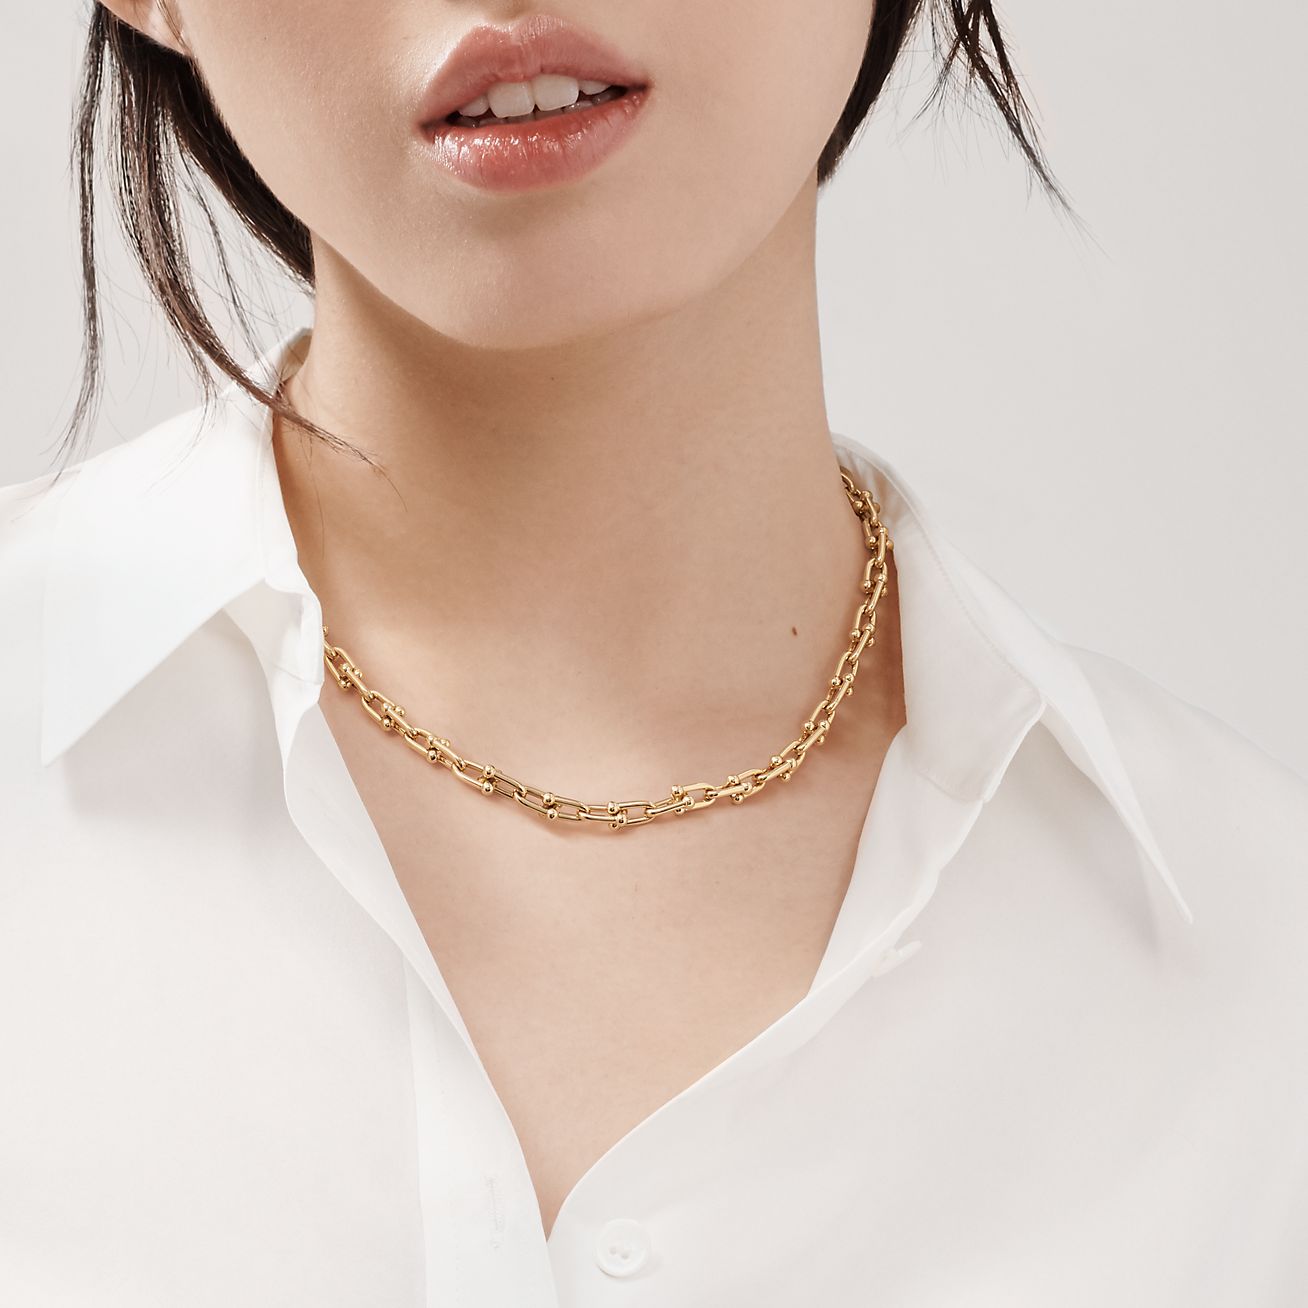 KIKICHIC | Minimalist Jewelry | NYC | Lock Charm Paper Clip Link Chain  Necklace Stainless Steel in 18k Gold Filled or Solid Silver.